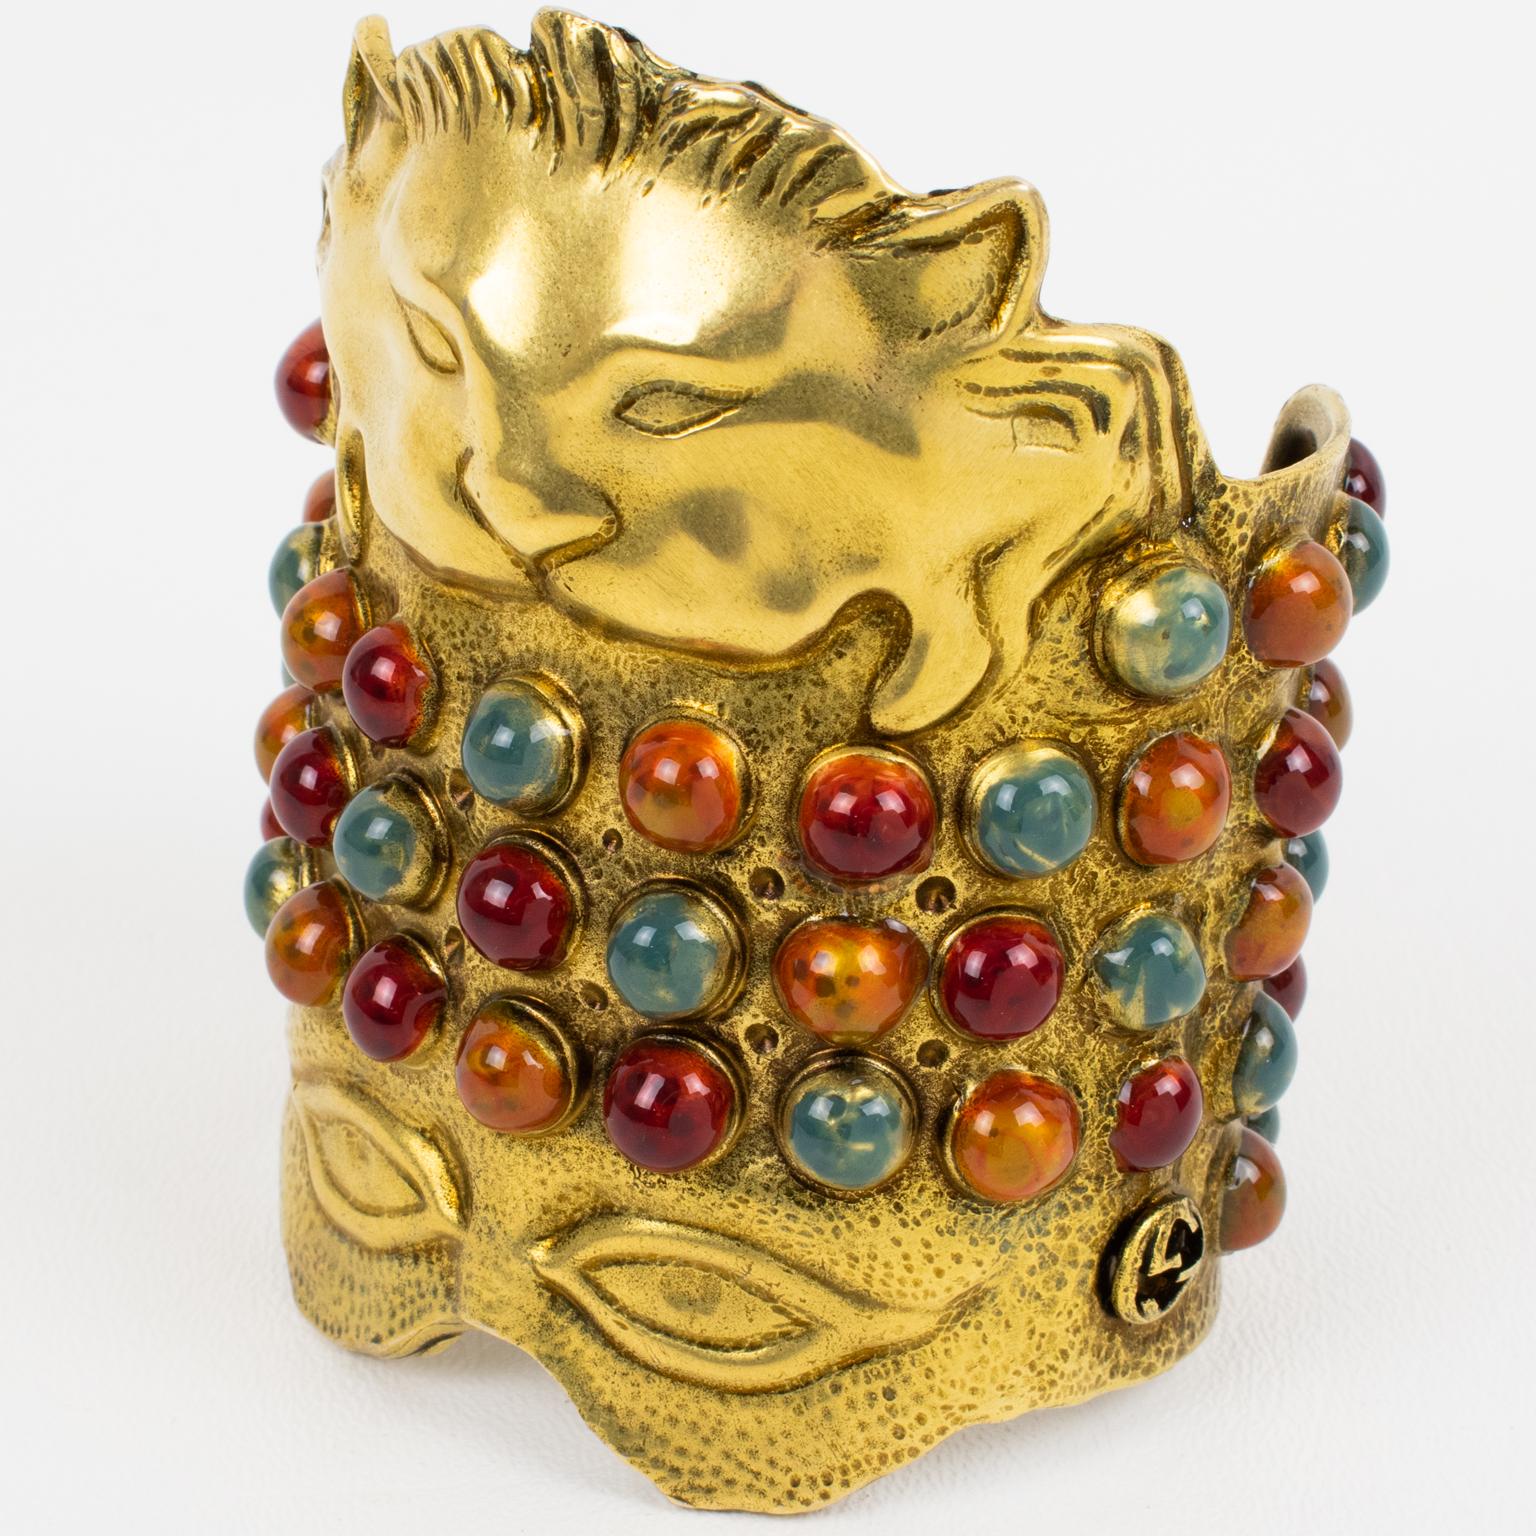 Alessandro Michéle created this fabulous Gucci, Italy massive cuff bracelet for the Gucci Cruise Collection 2020 runway show. This cuff bracelet is patinated gilded metal and features a mask inspired by Greek and Mesopotamian antiquity. The piece is